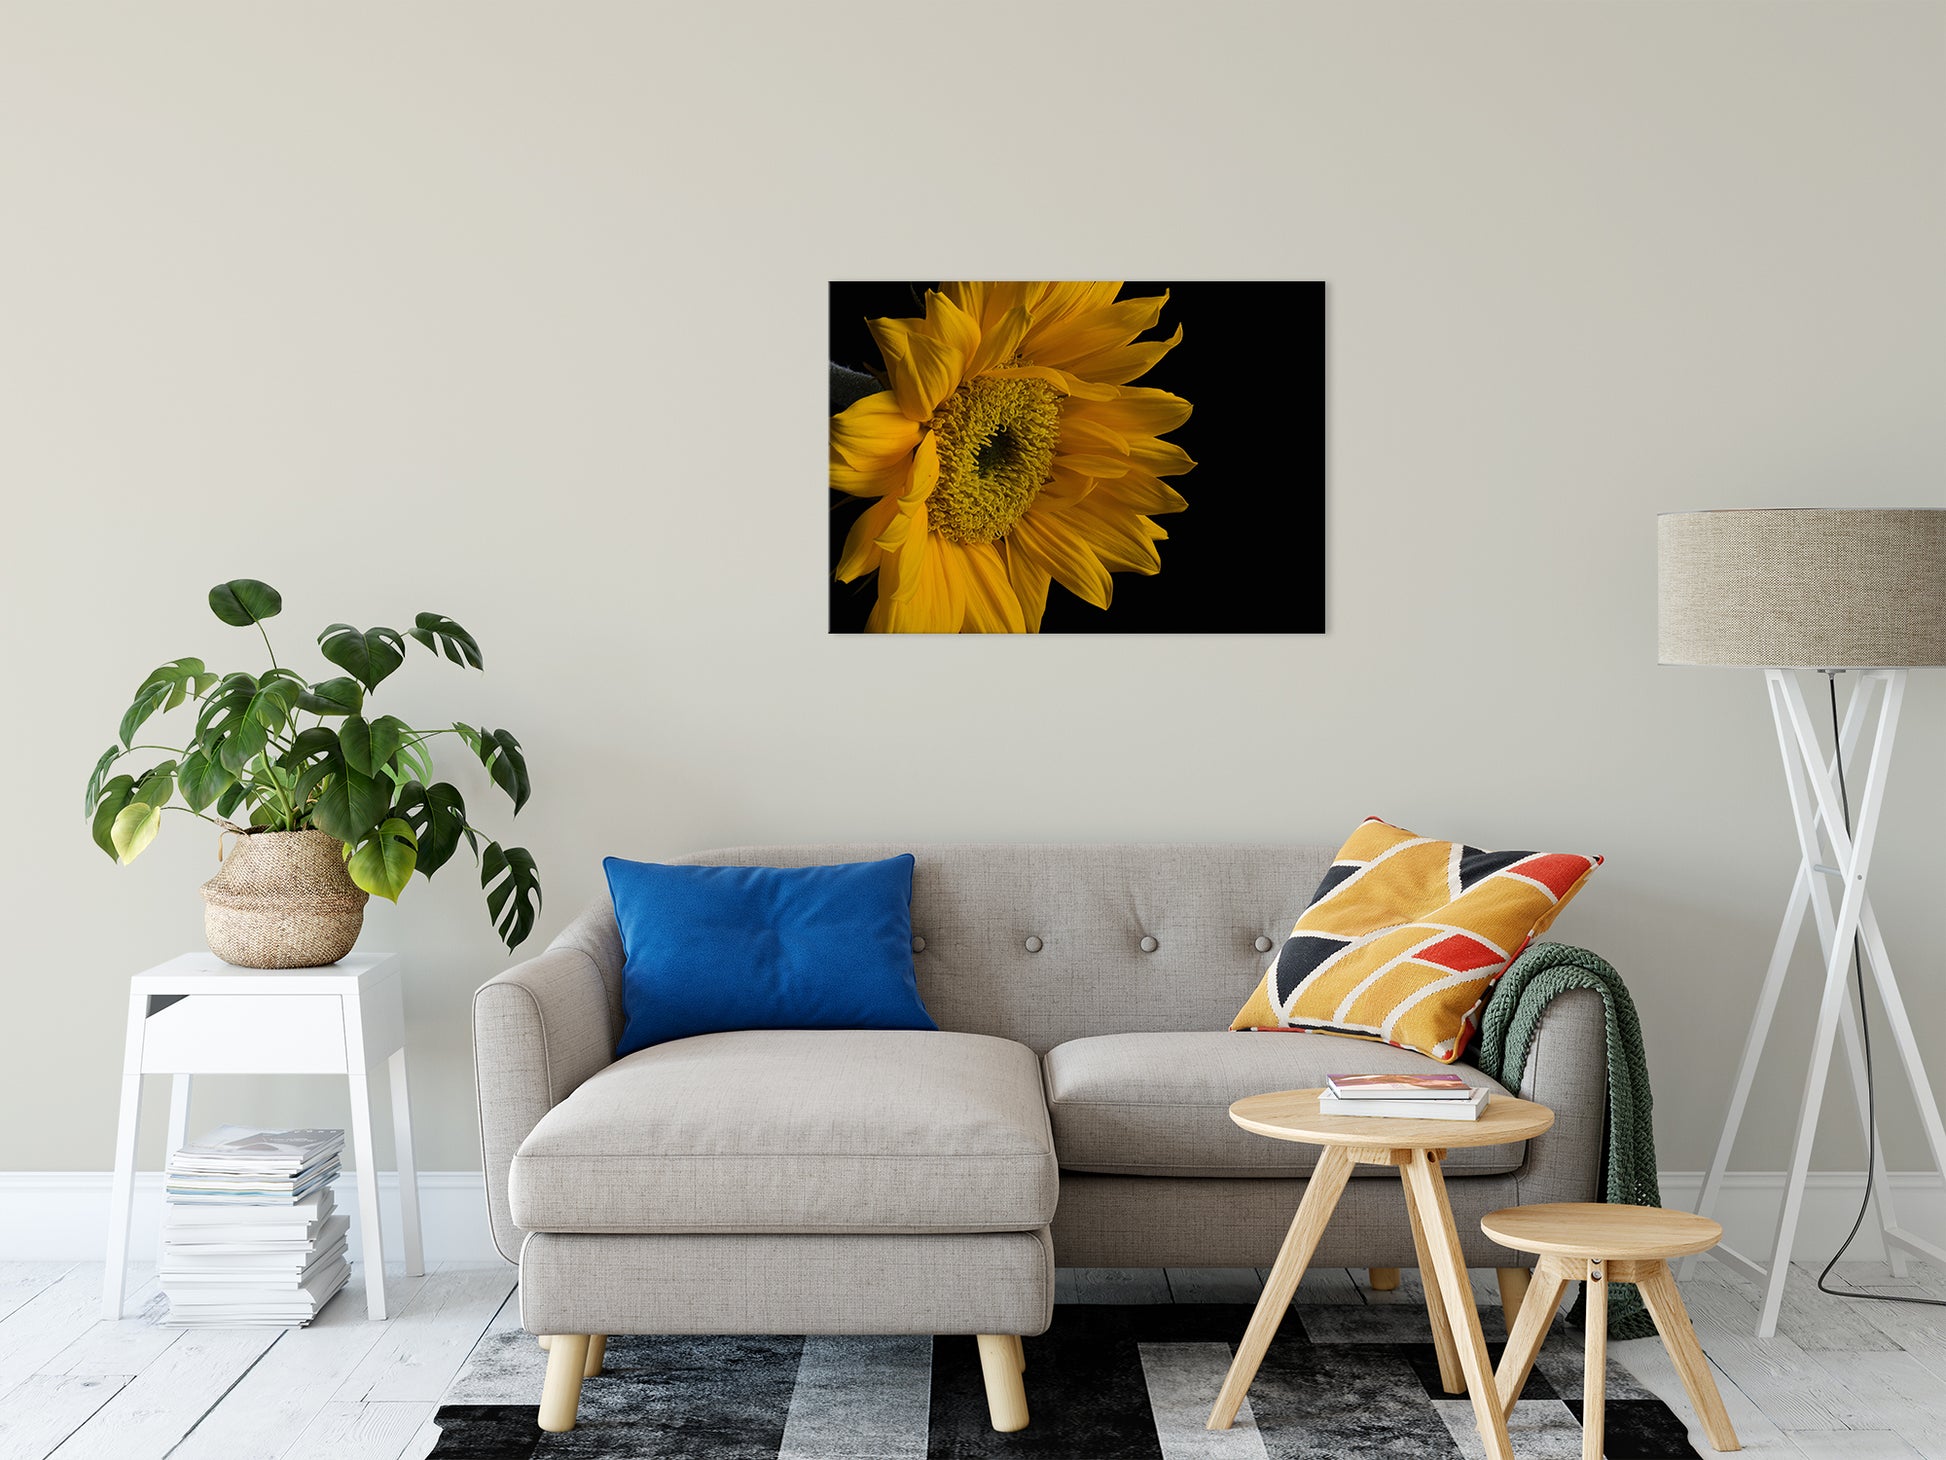 Sunflower from Left Nature / Floral Photo Fine Art Canvas Wall Art Prints 24" x 36" - PIPAFINEART